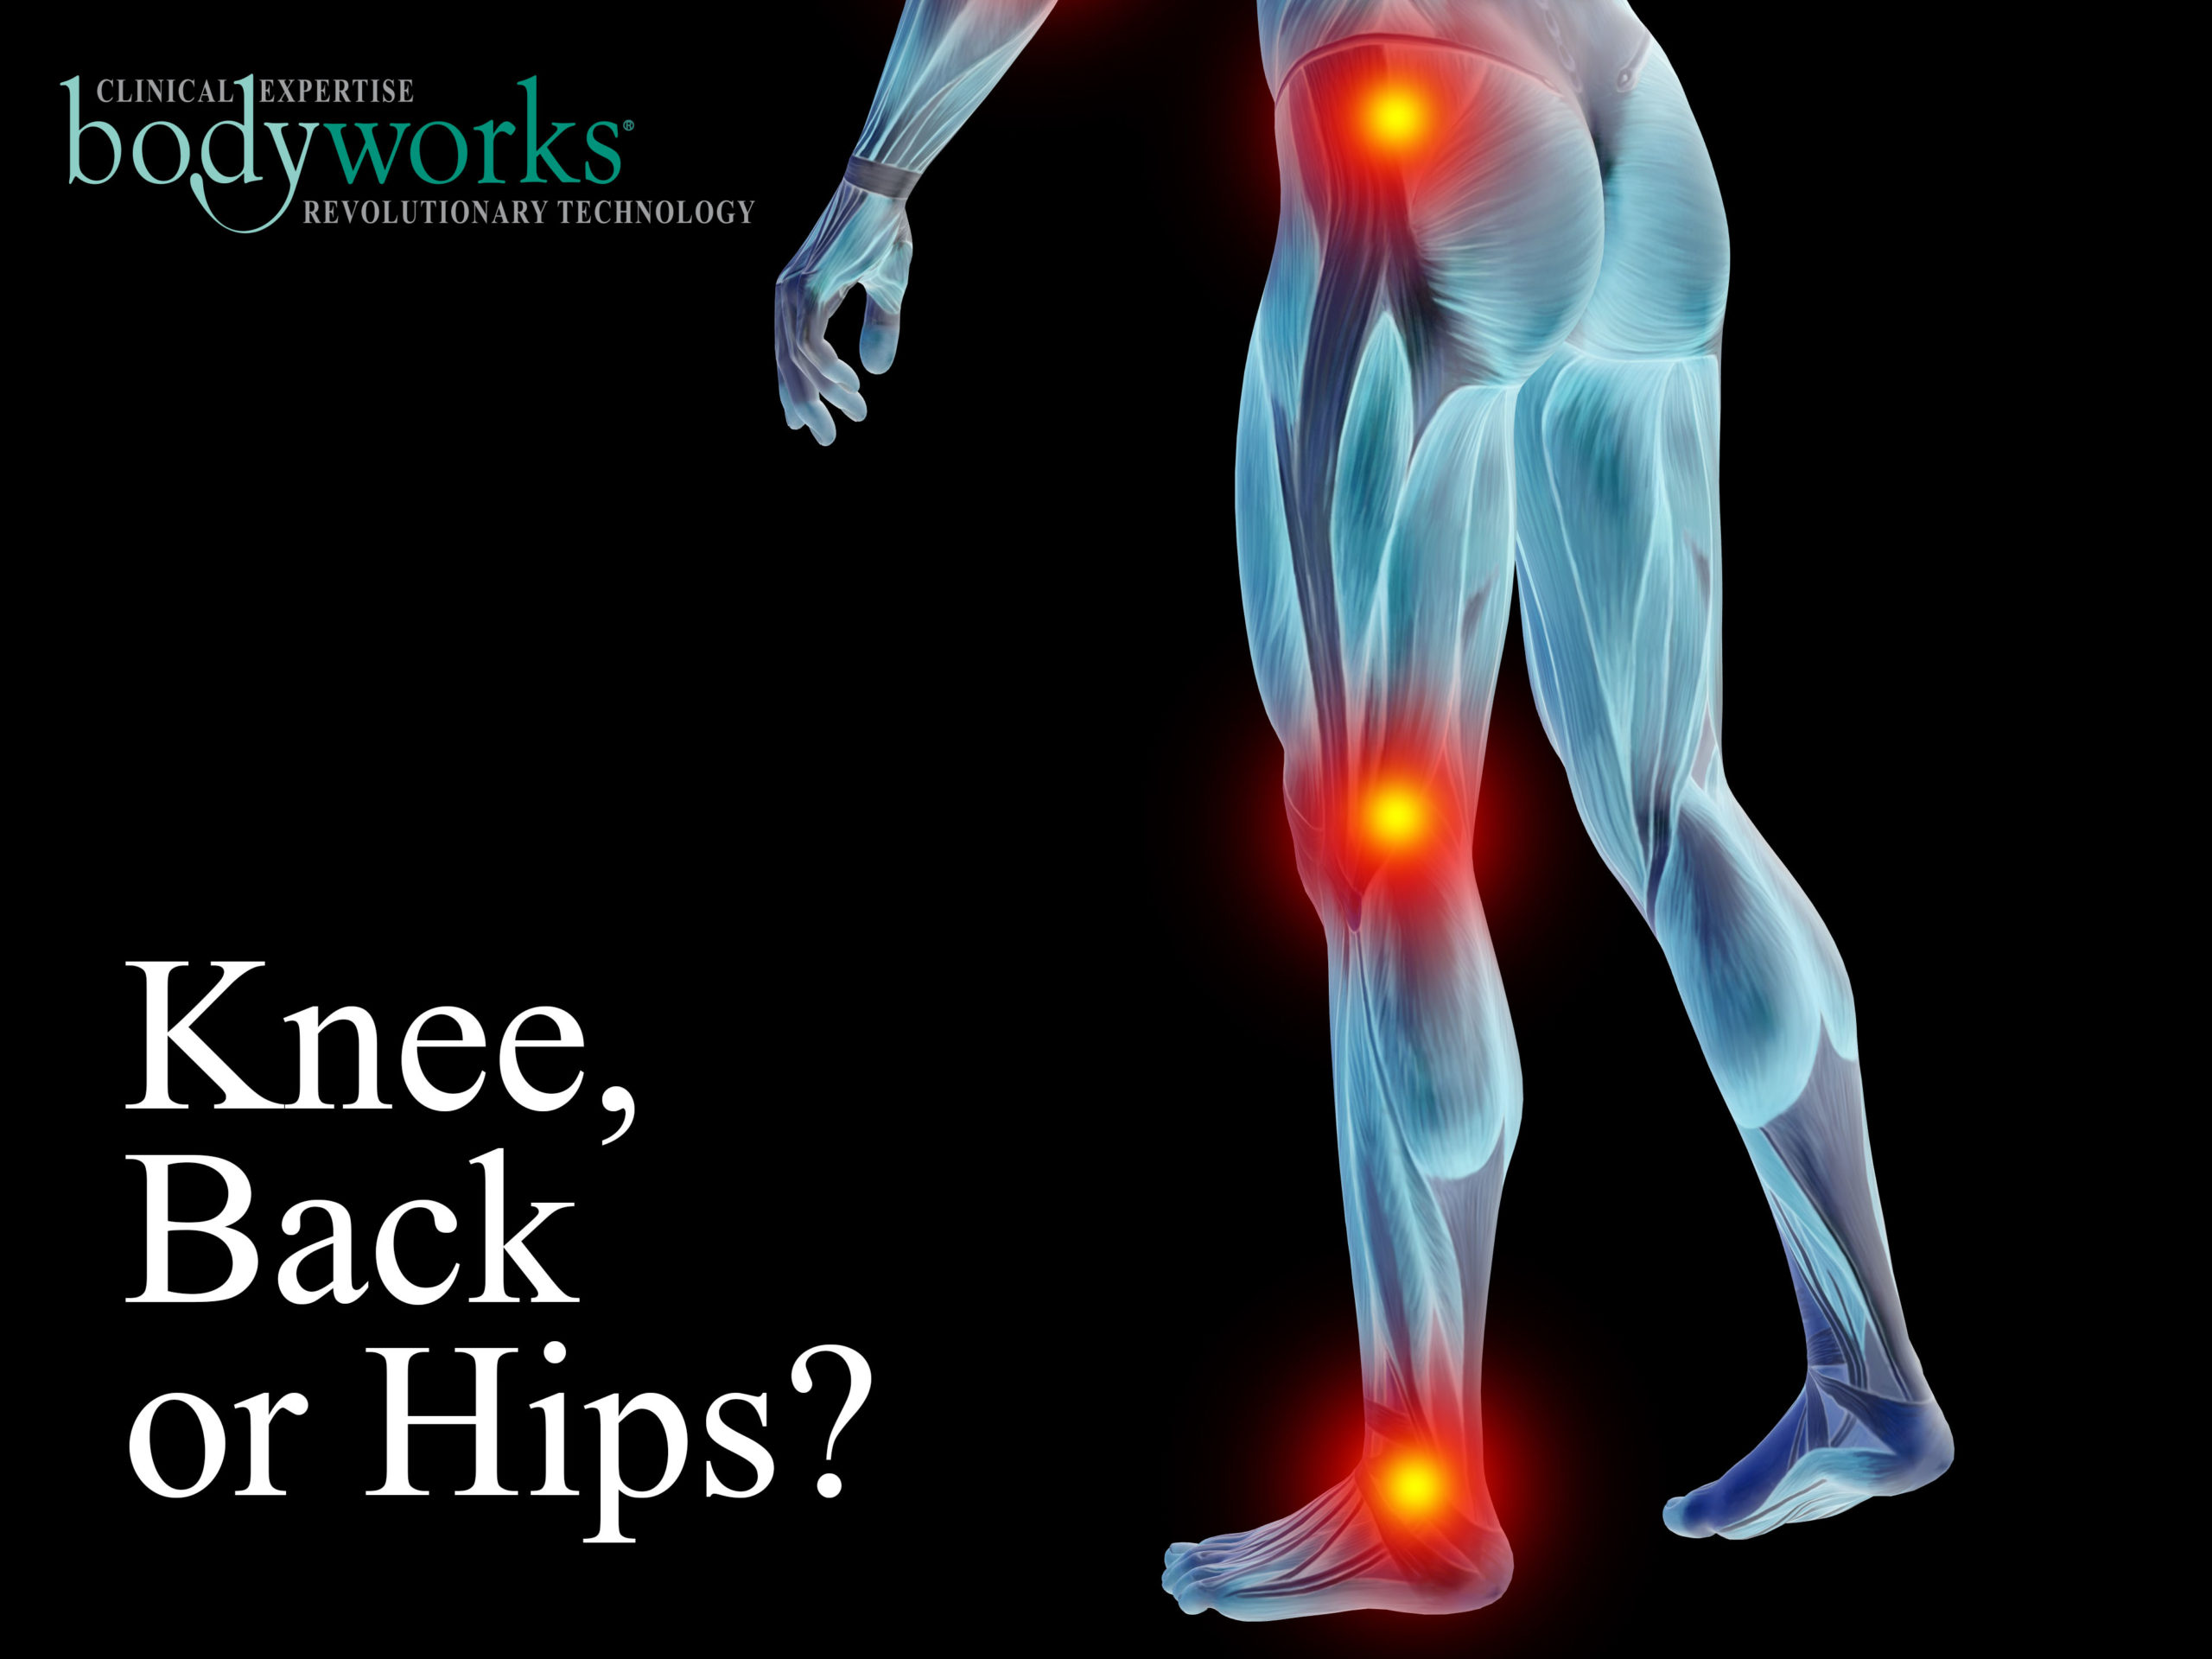 Knee Back Hip - referred pain. Consultant Estelle Mitchell at Bodyworks